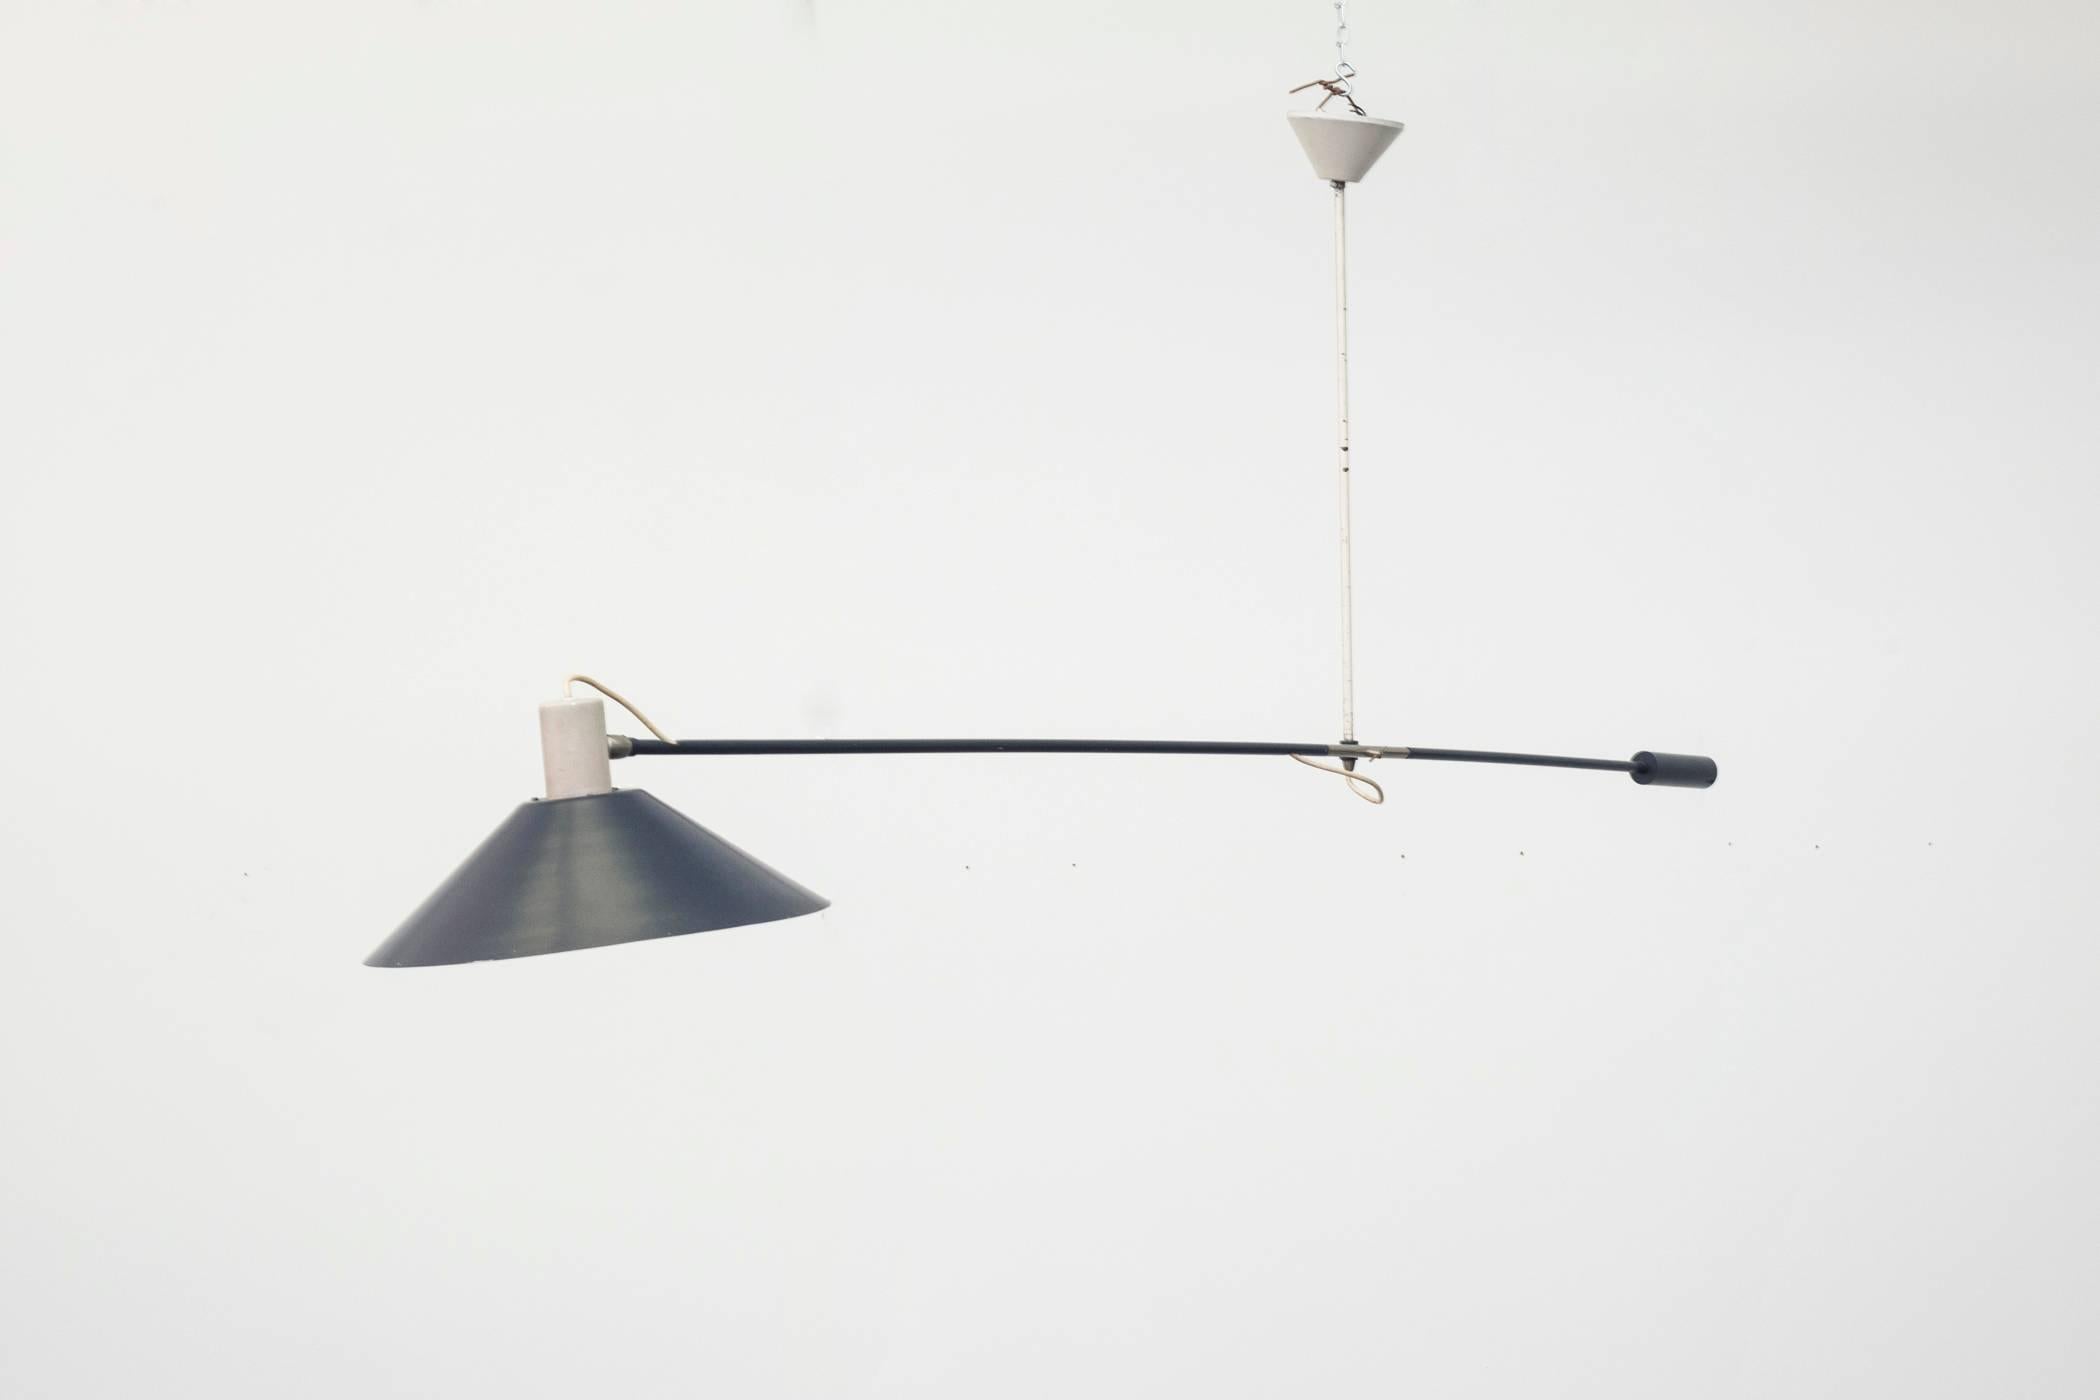 Rare enameled metal counter weight ceiling mount light in charcoal grey. The handle is weighted to help adjust the pitch of the light and can be fastened in place. Visible wear, some chipping. Very original condition. An earlier version is also